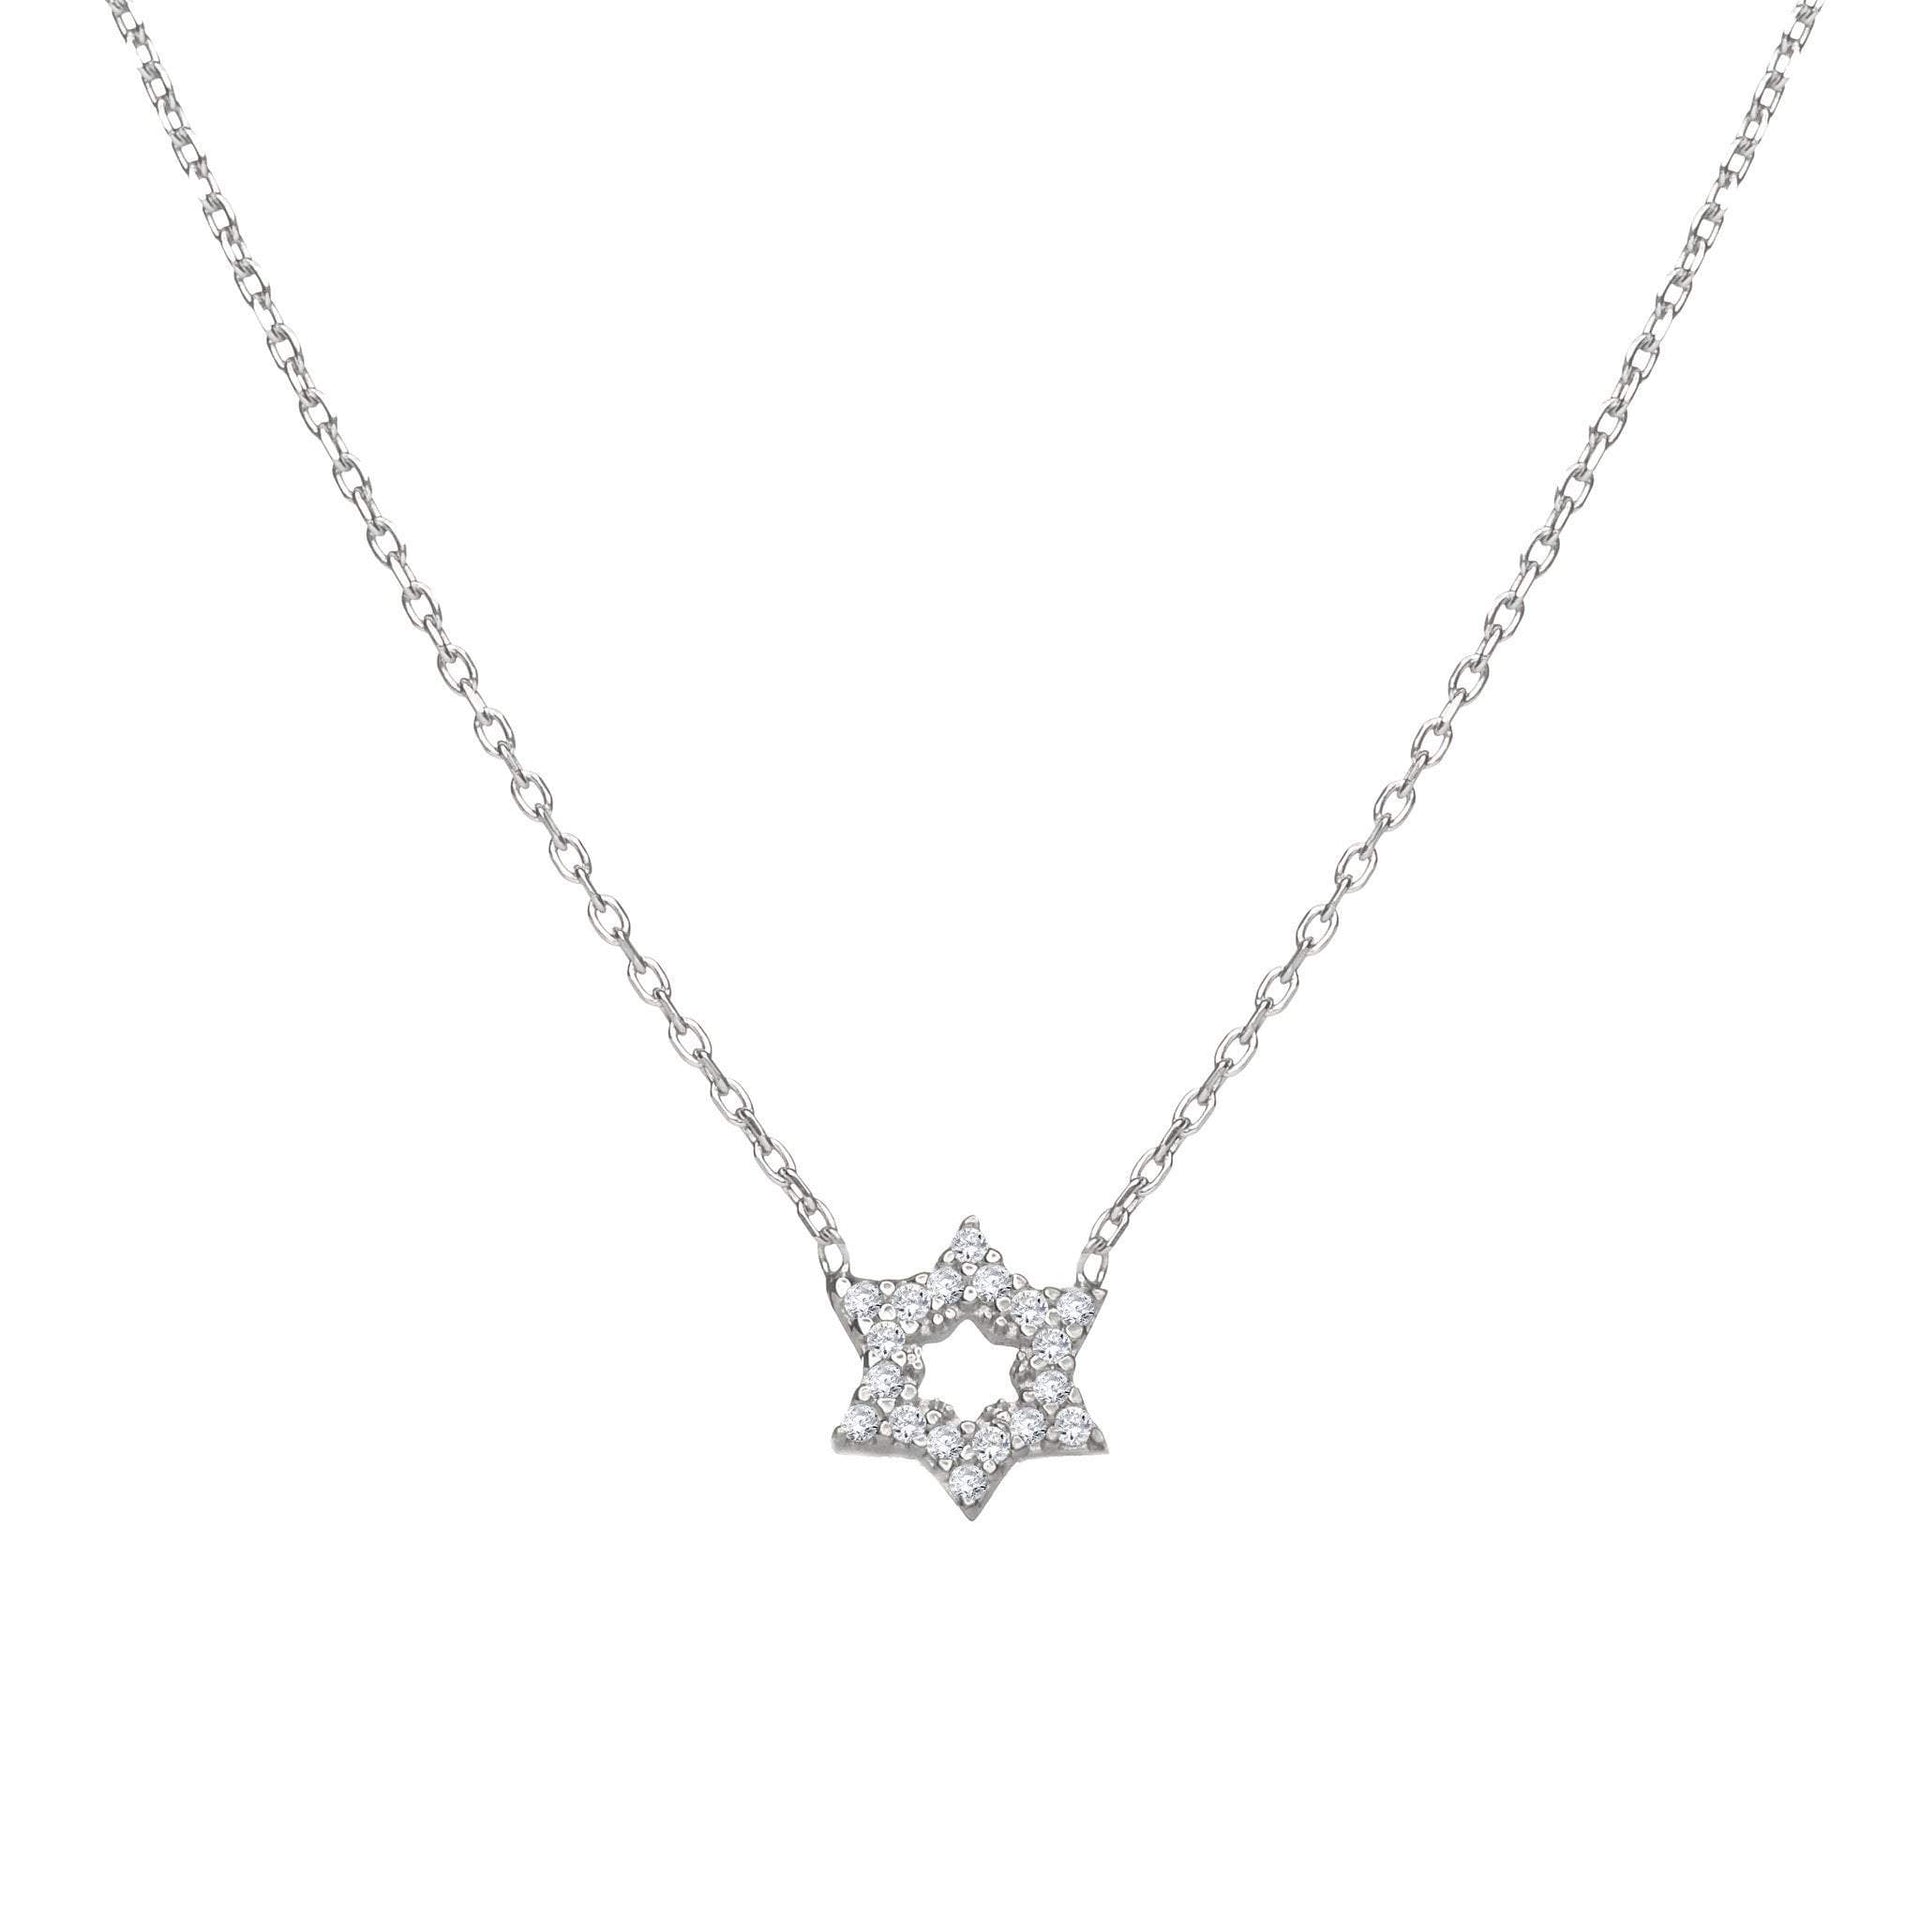 Alef Bet Necklaces Silver Star of David Sparkle Necklace - Gold, Silver or Rose Gold